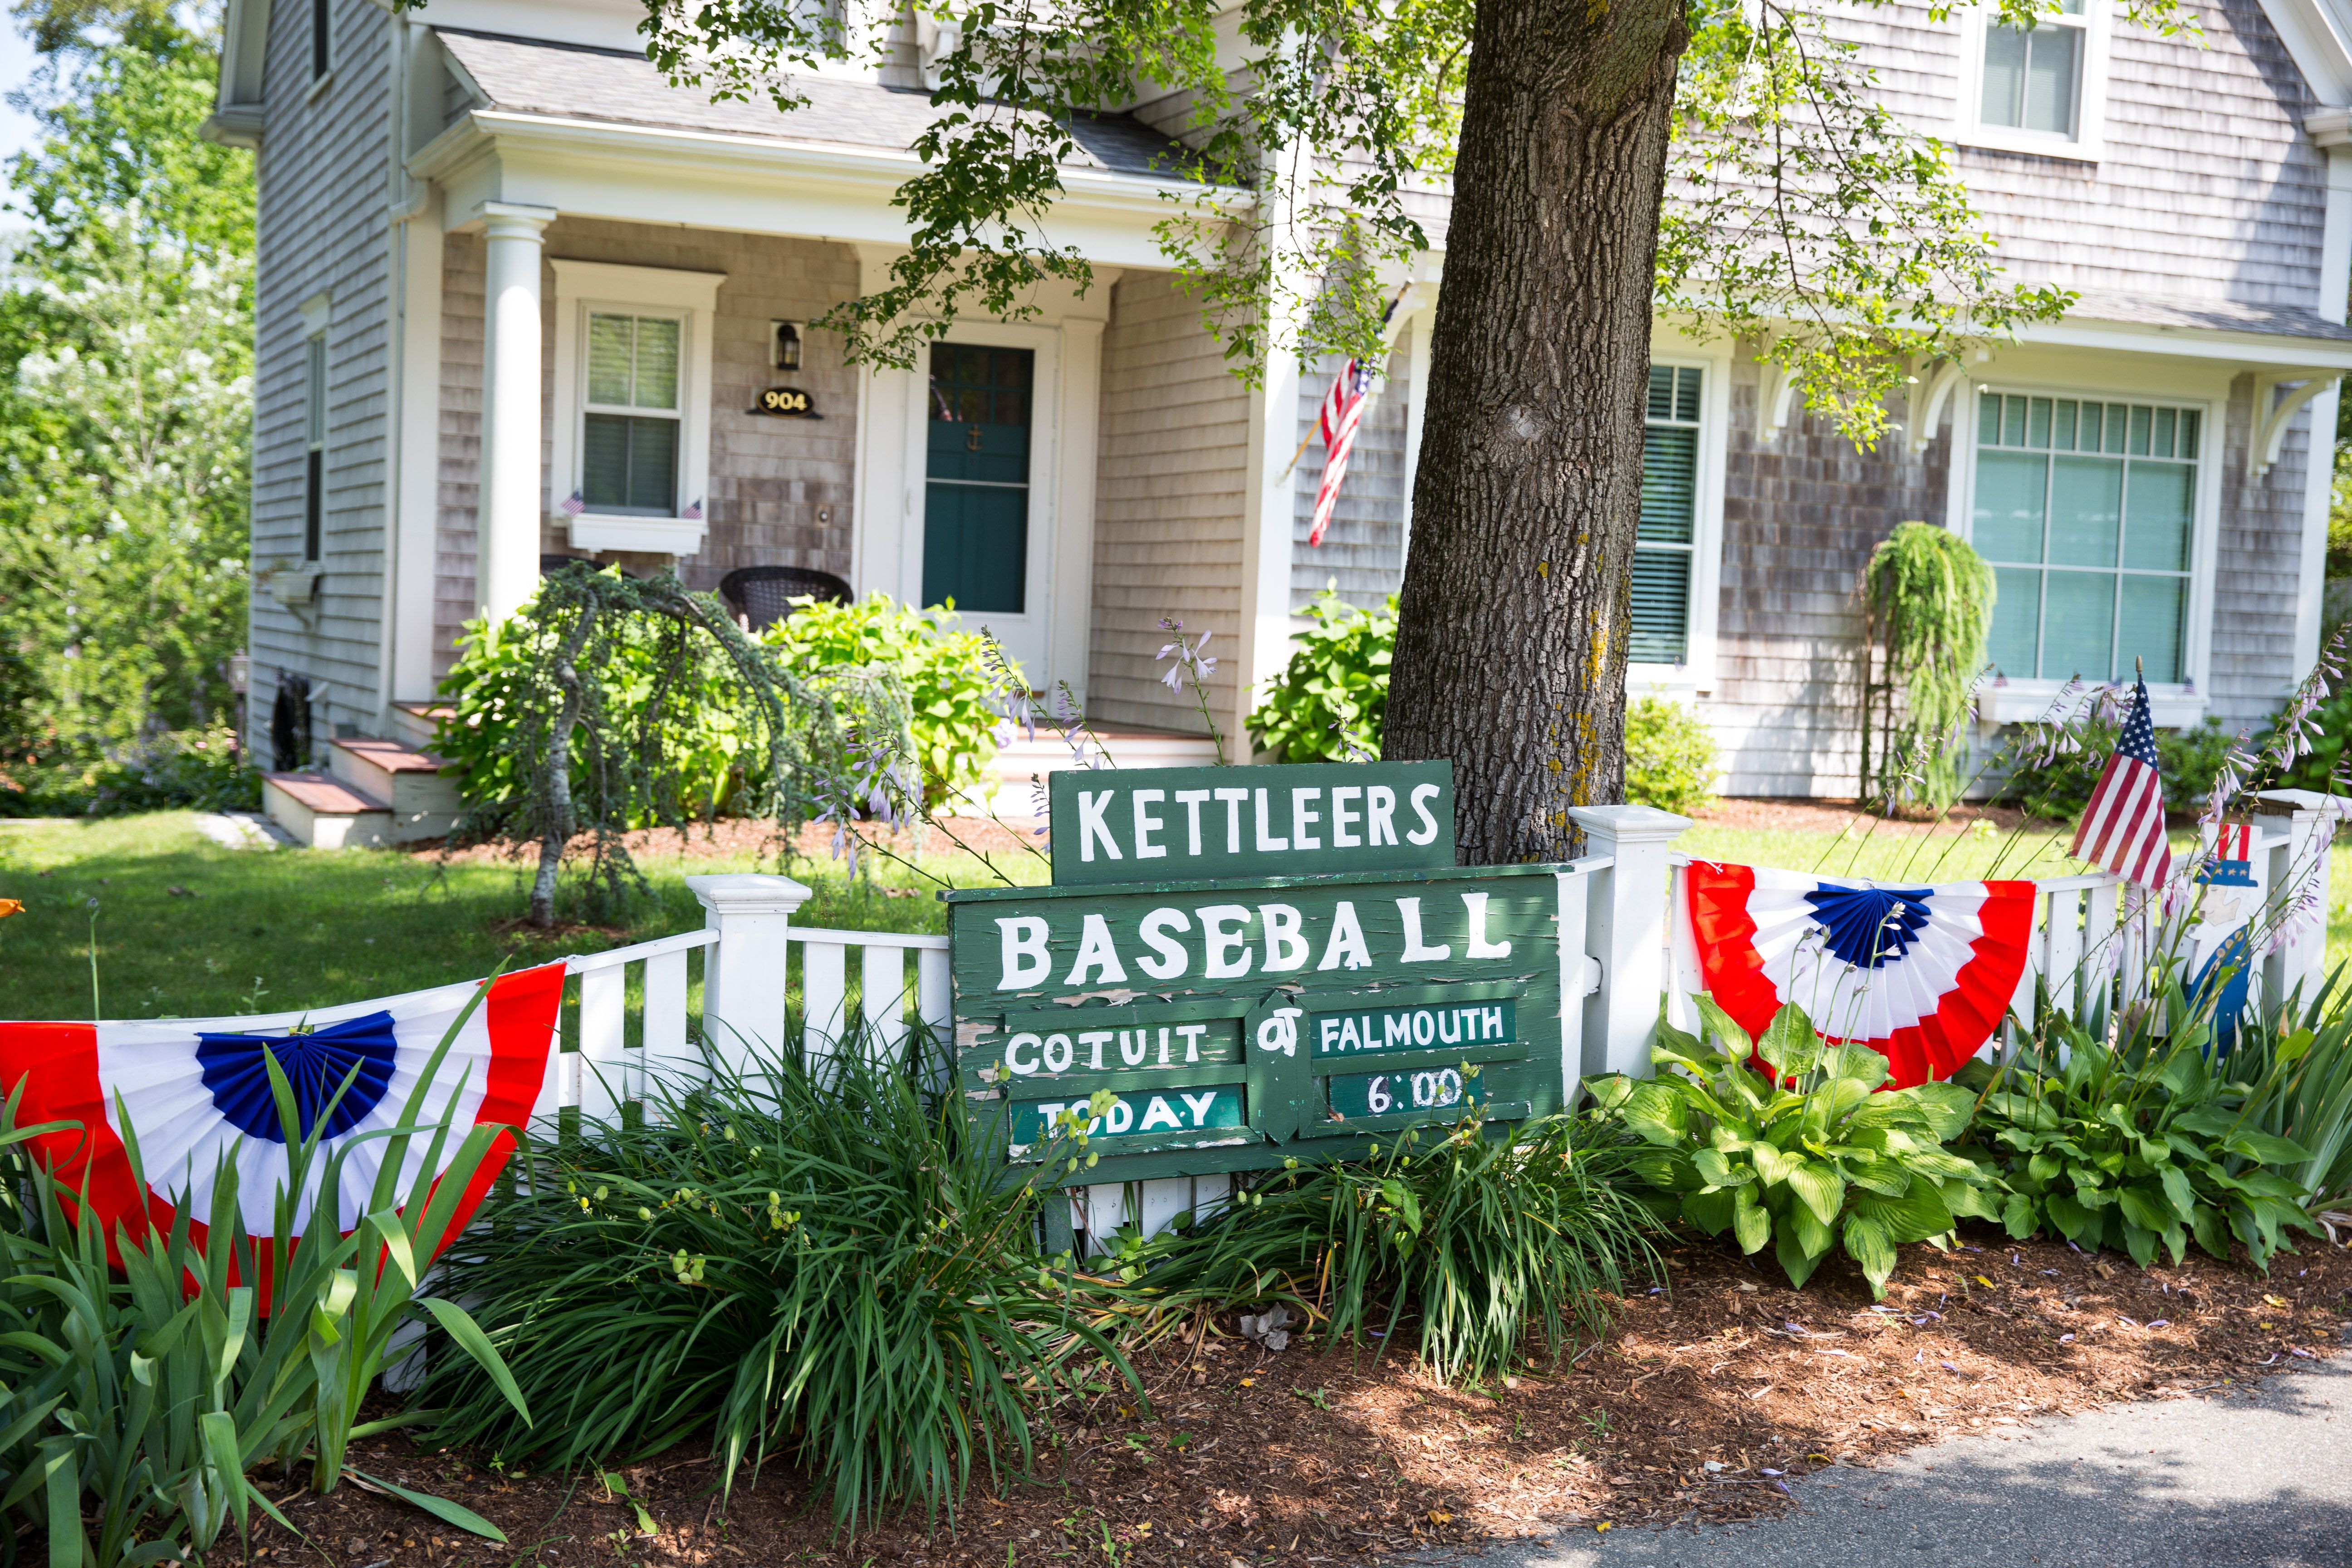 A baseball sign in front of a house.